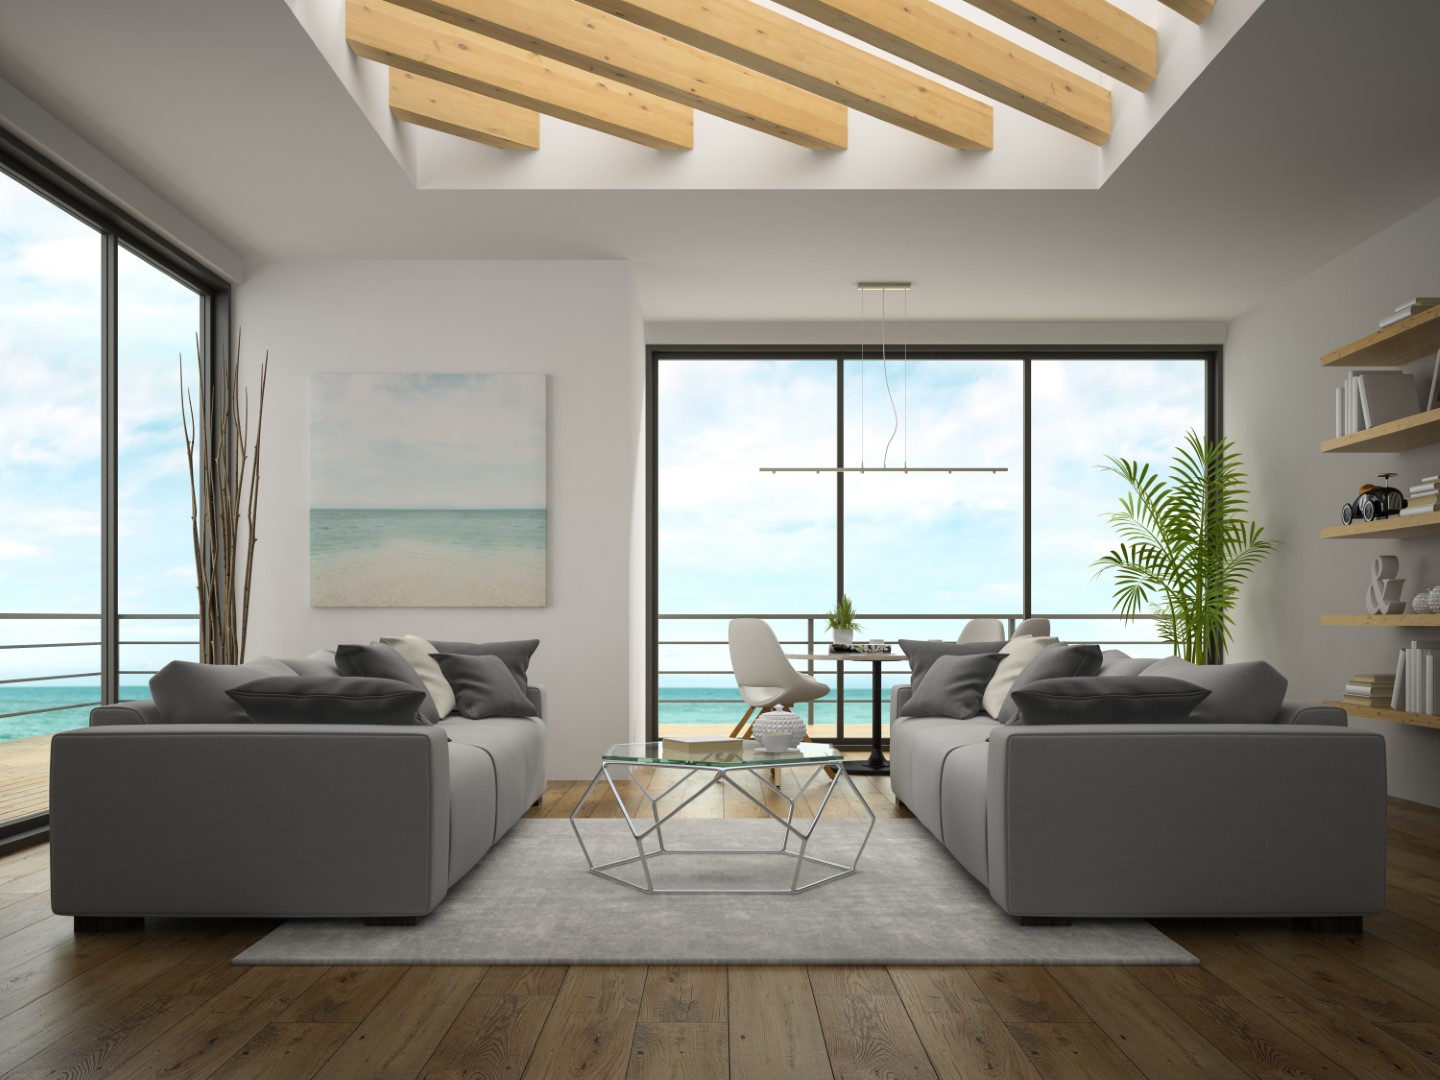 Interior Of Modern Design Room With Sea View 3d Re 2023 11 27 05 11 57 Utc